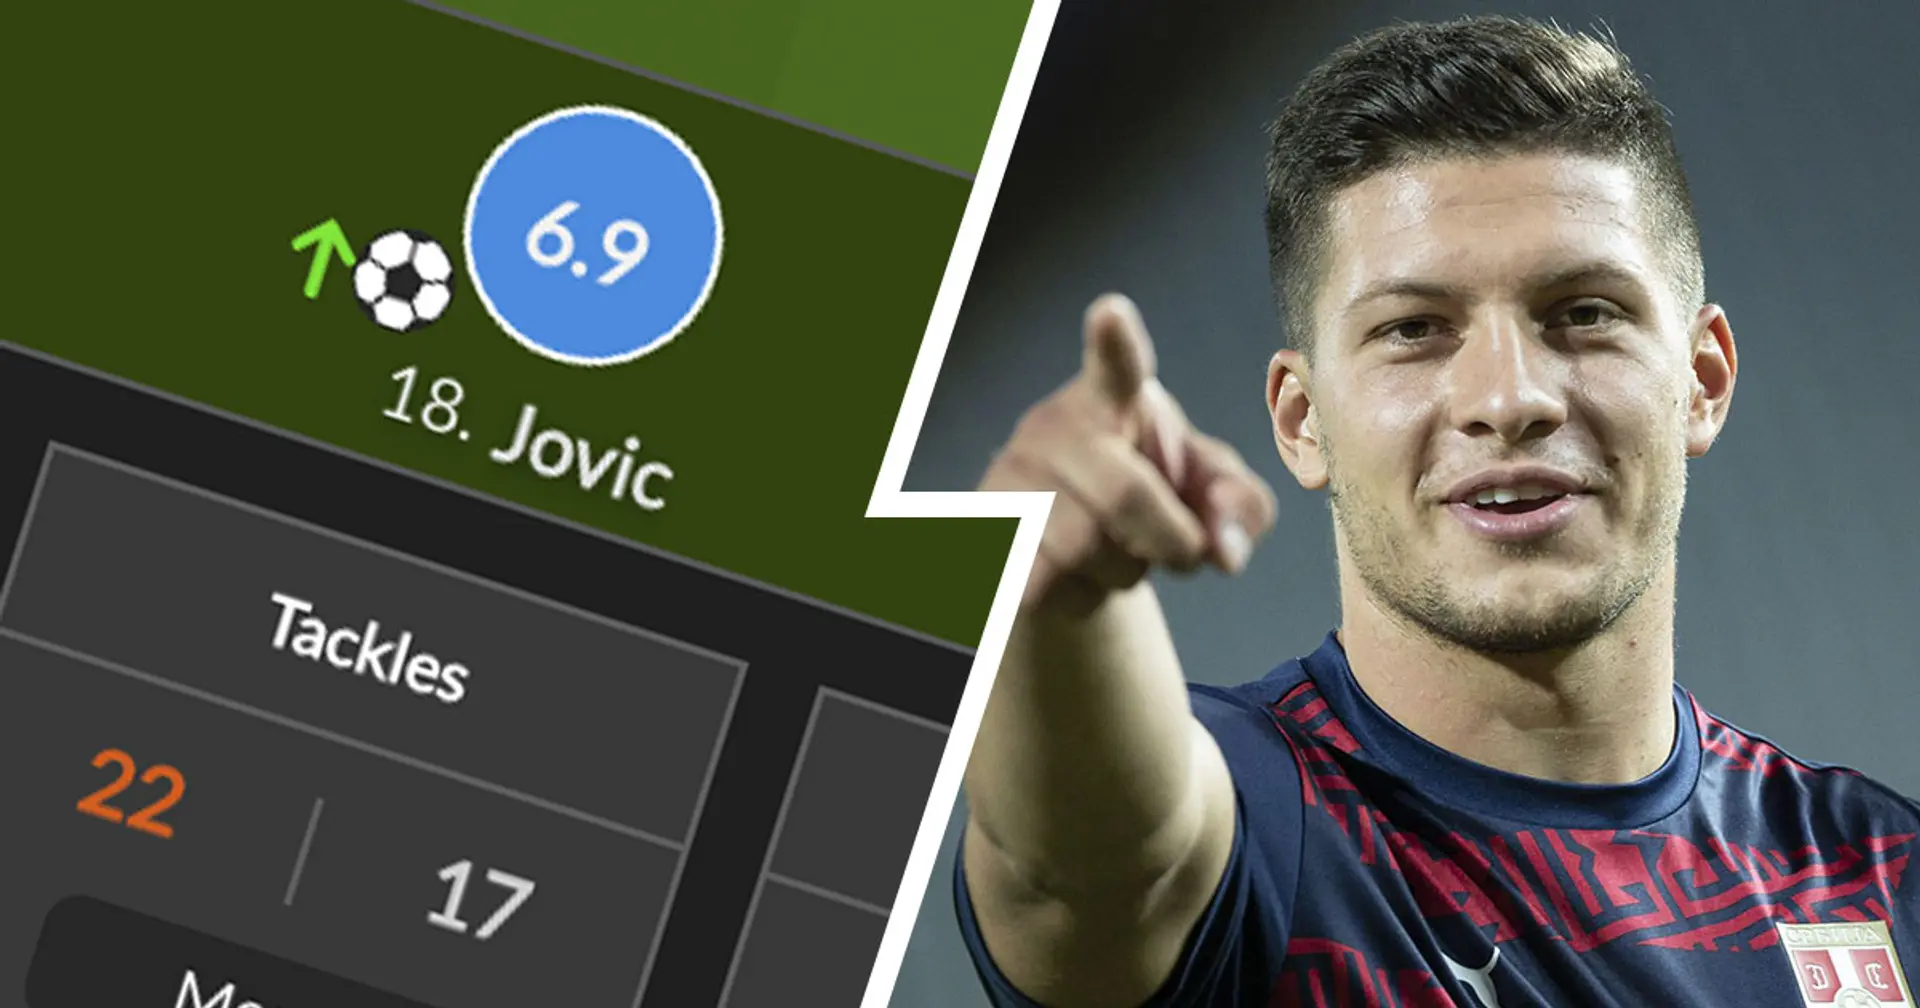 Bad luck and lack of trust? Madridista breaks down Jovic's Real Madrid career game by game